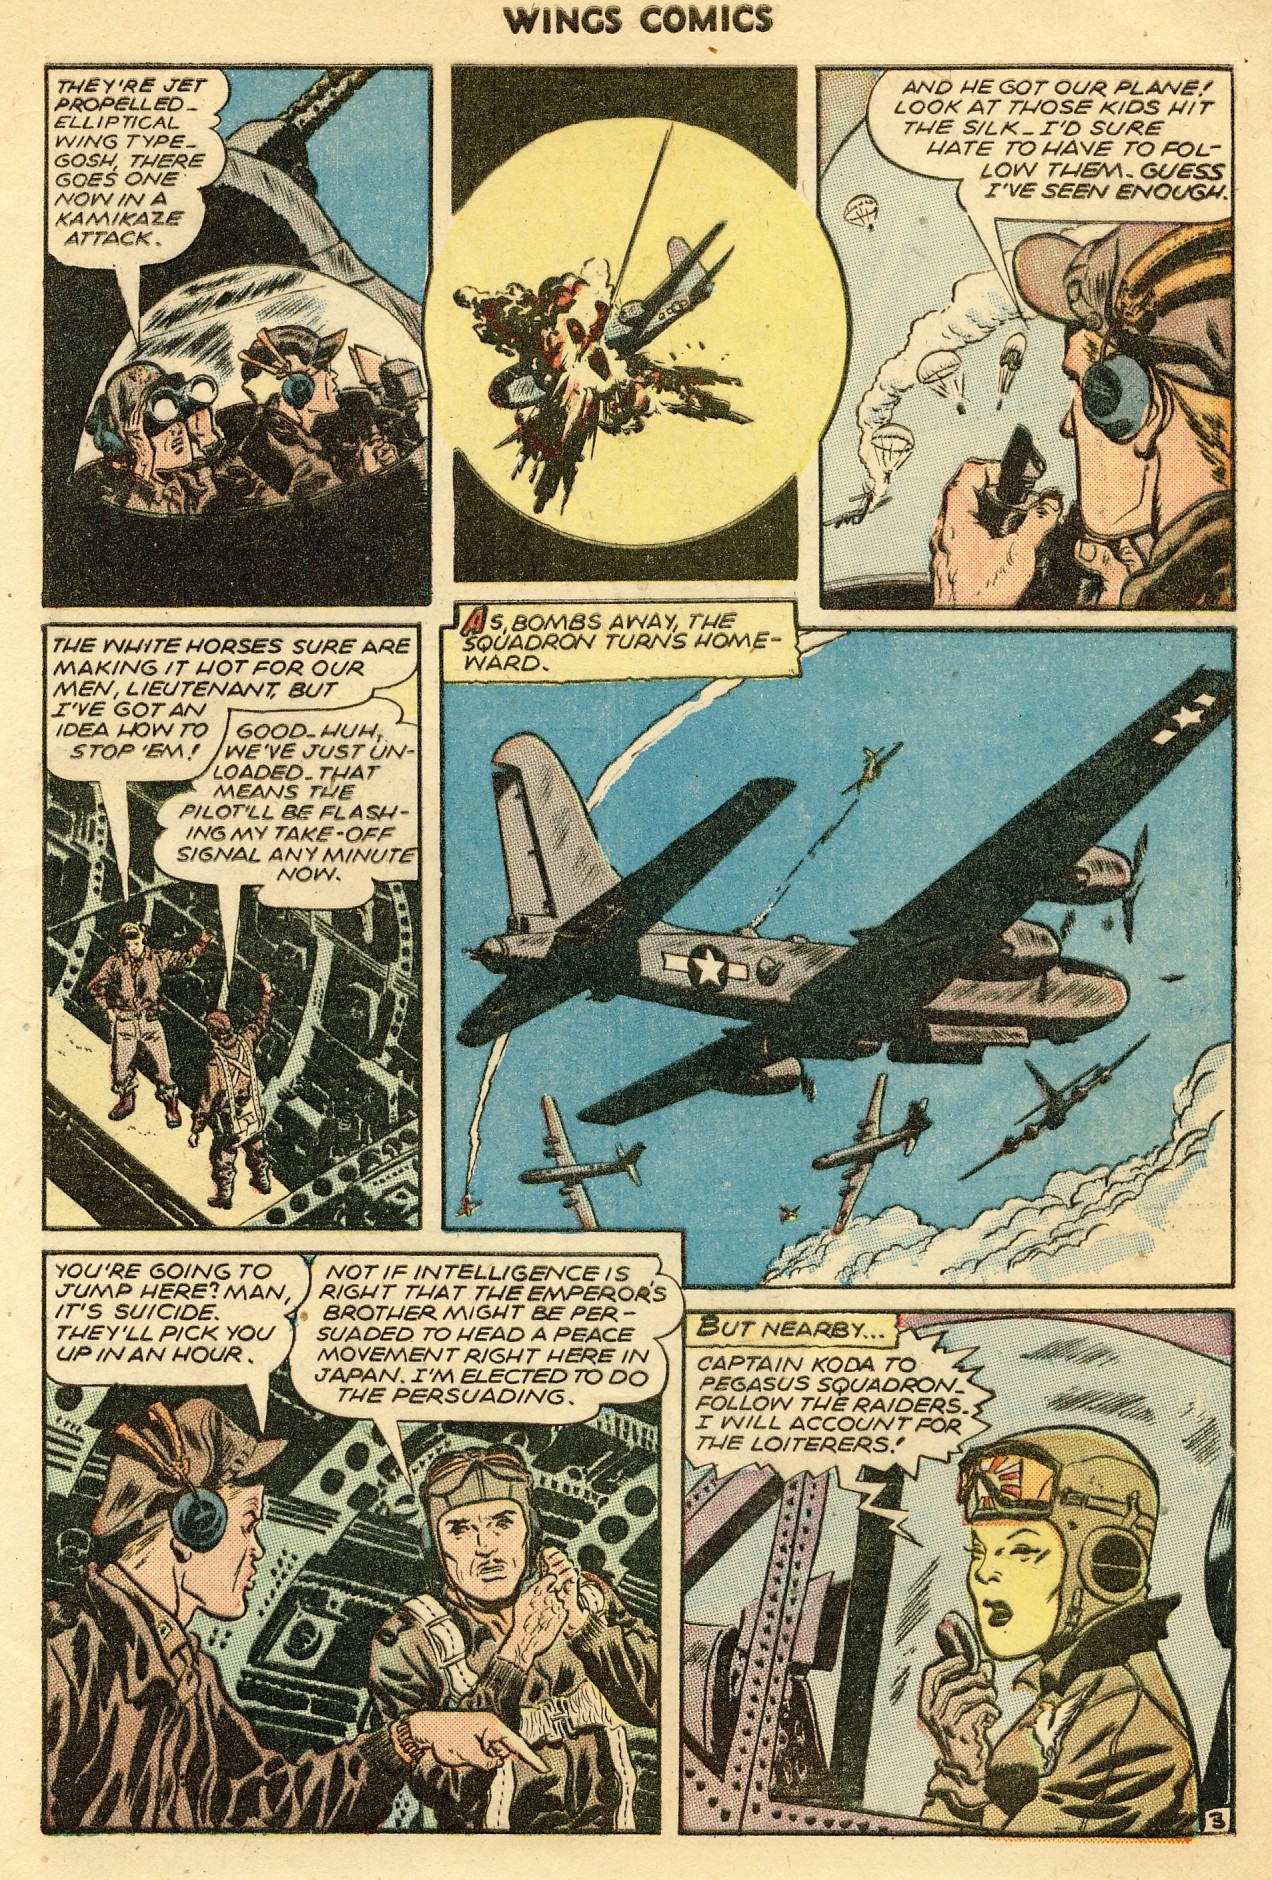 Read online Wings Comics comic -  Issue #64 - 5